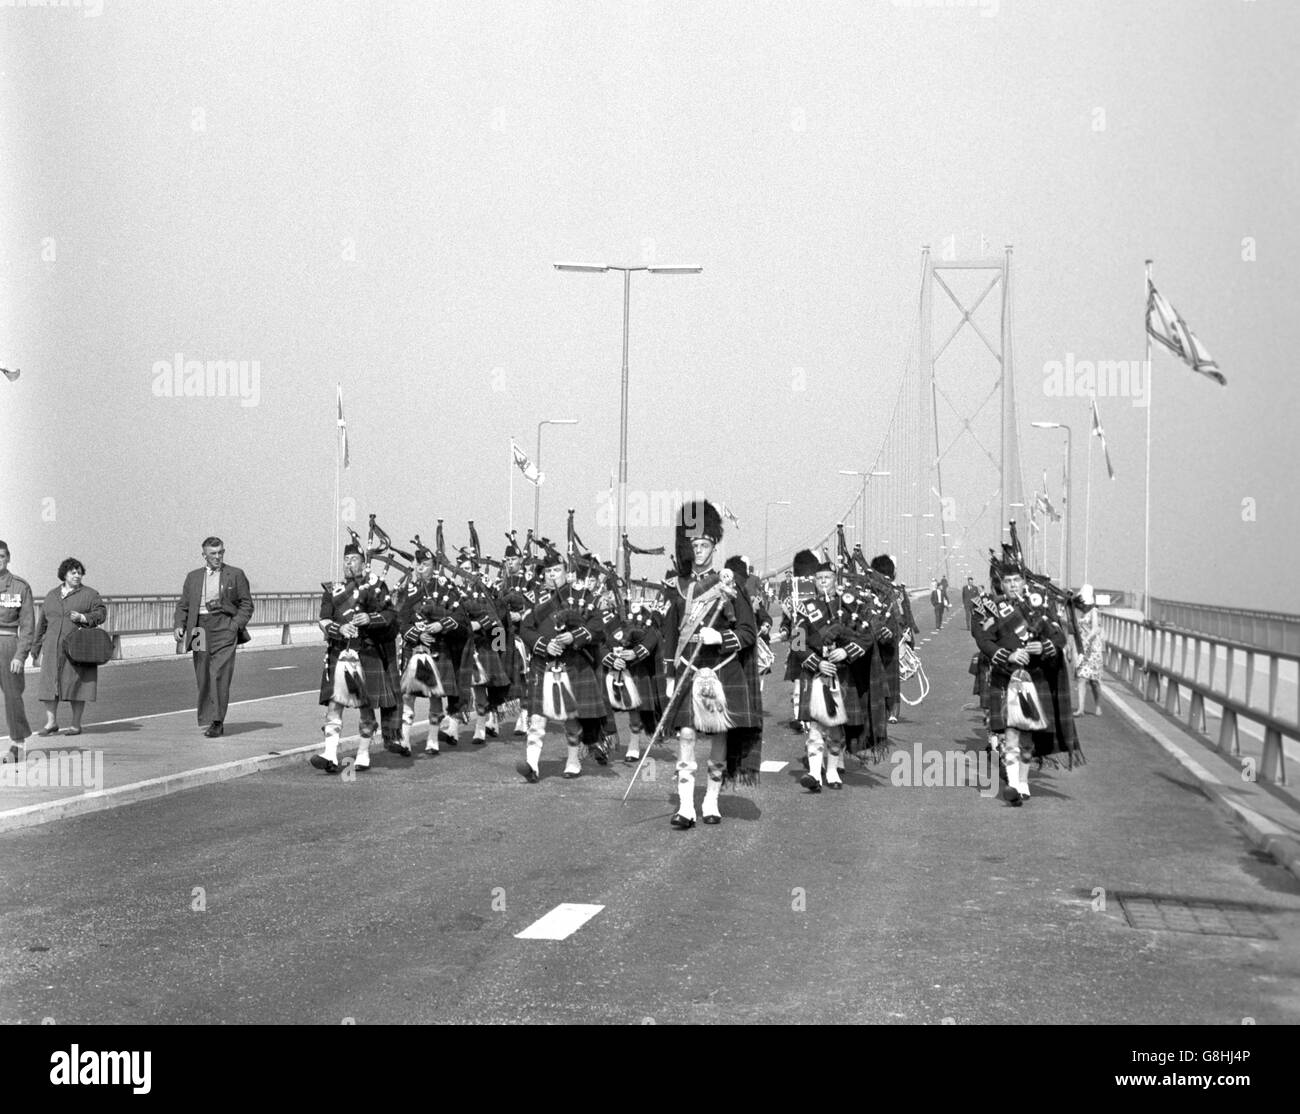 20million Forth Road Bridge after it had been opened by Queen Elizabeth II. The Queen and Prince Philip were the first to drive across the bridge, which spans the River Forth and provides a link between Edinburgh and Fife. Stock Photo